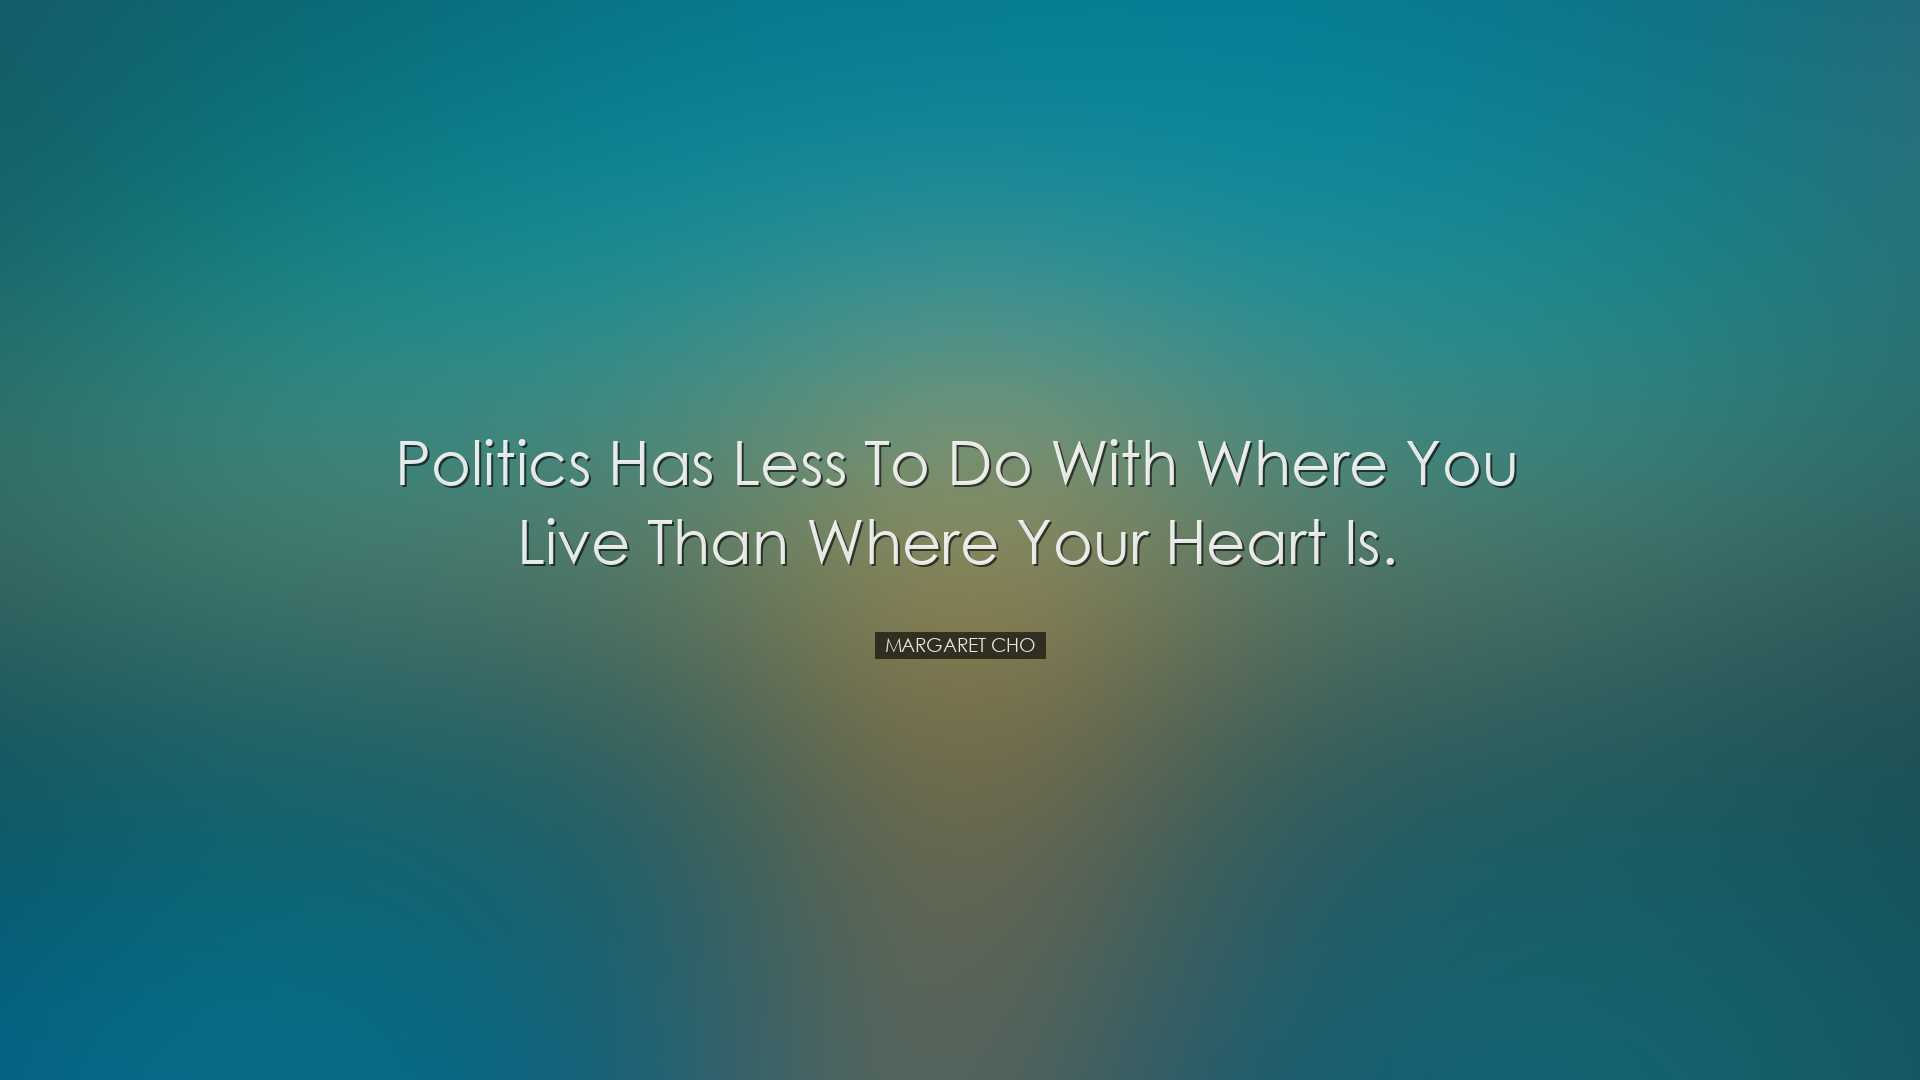 Politics has less to do with where you live than where your heart